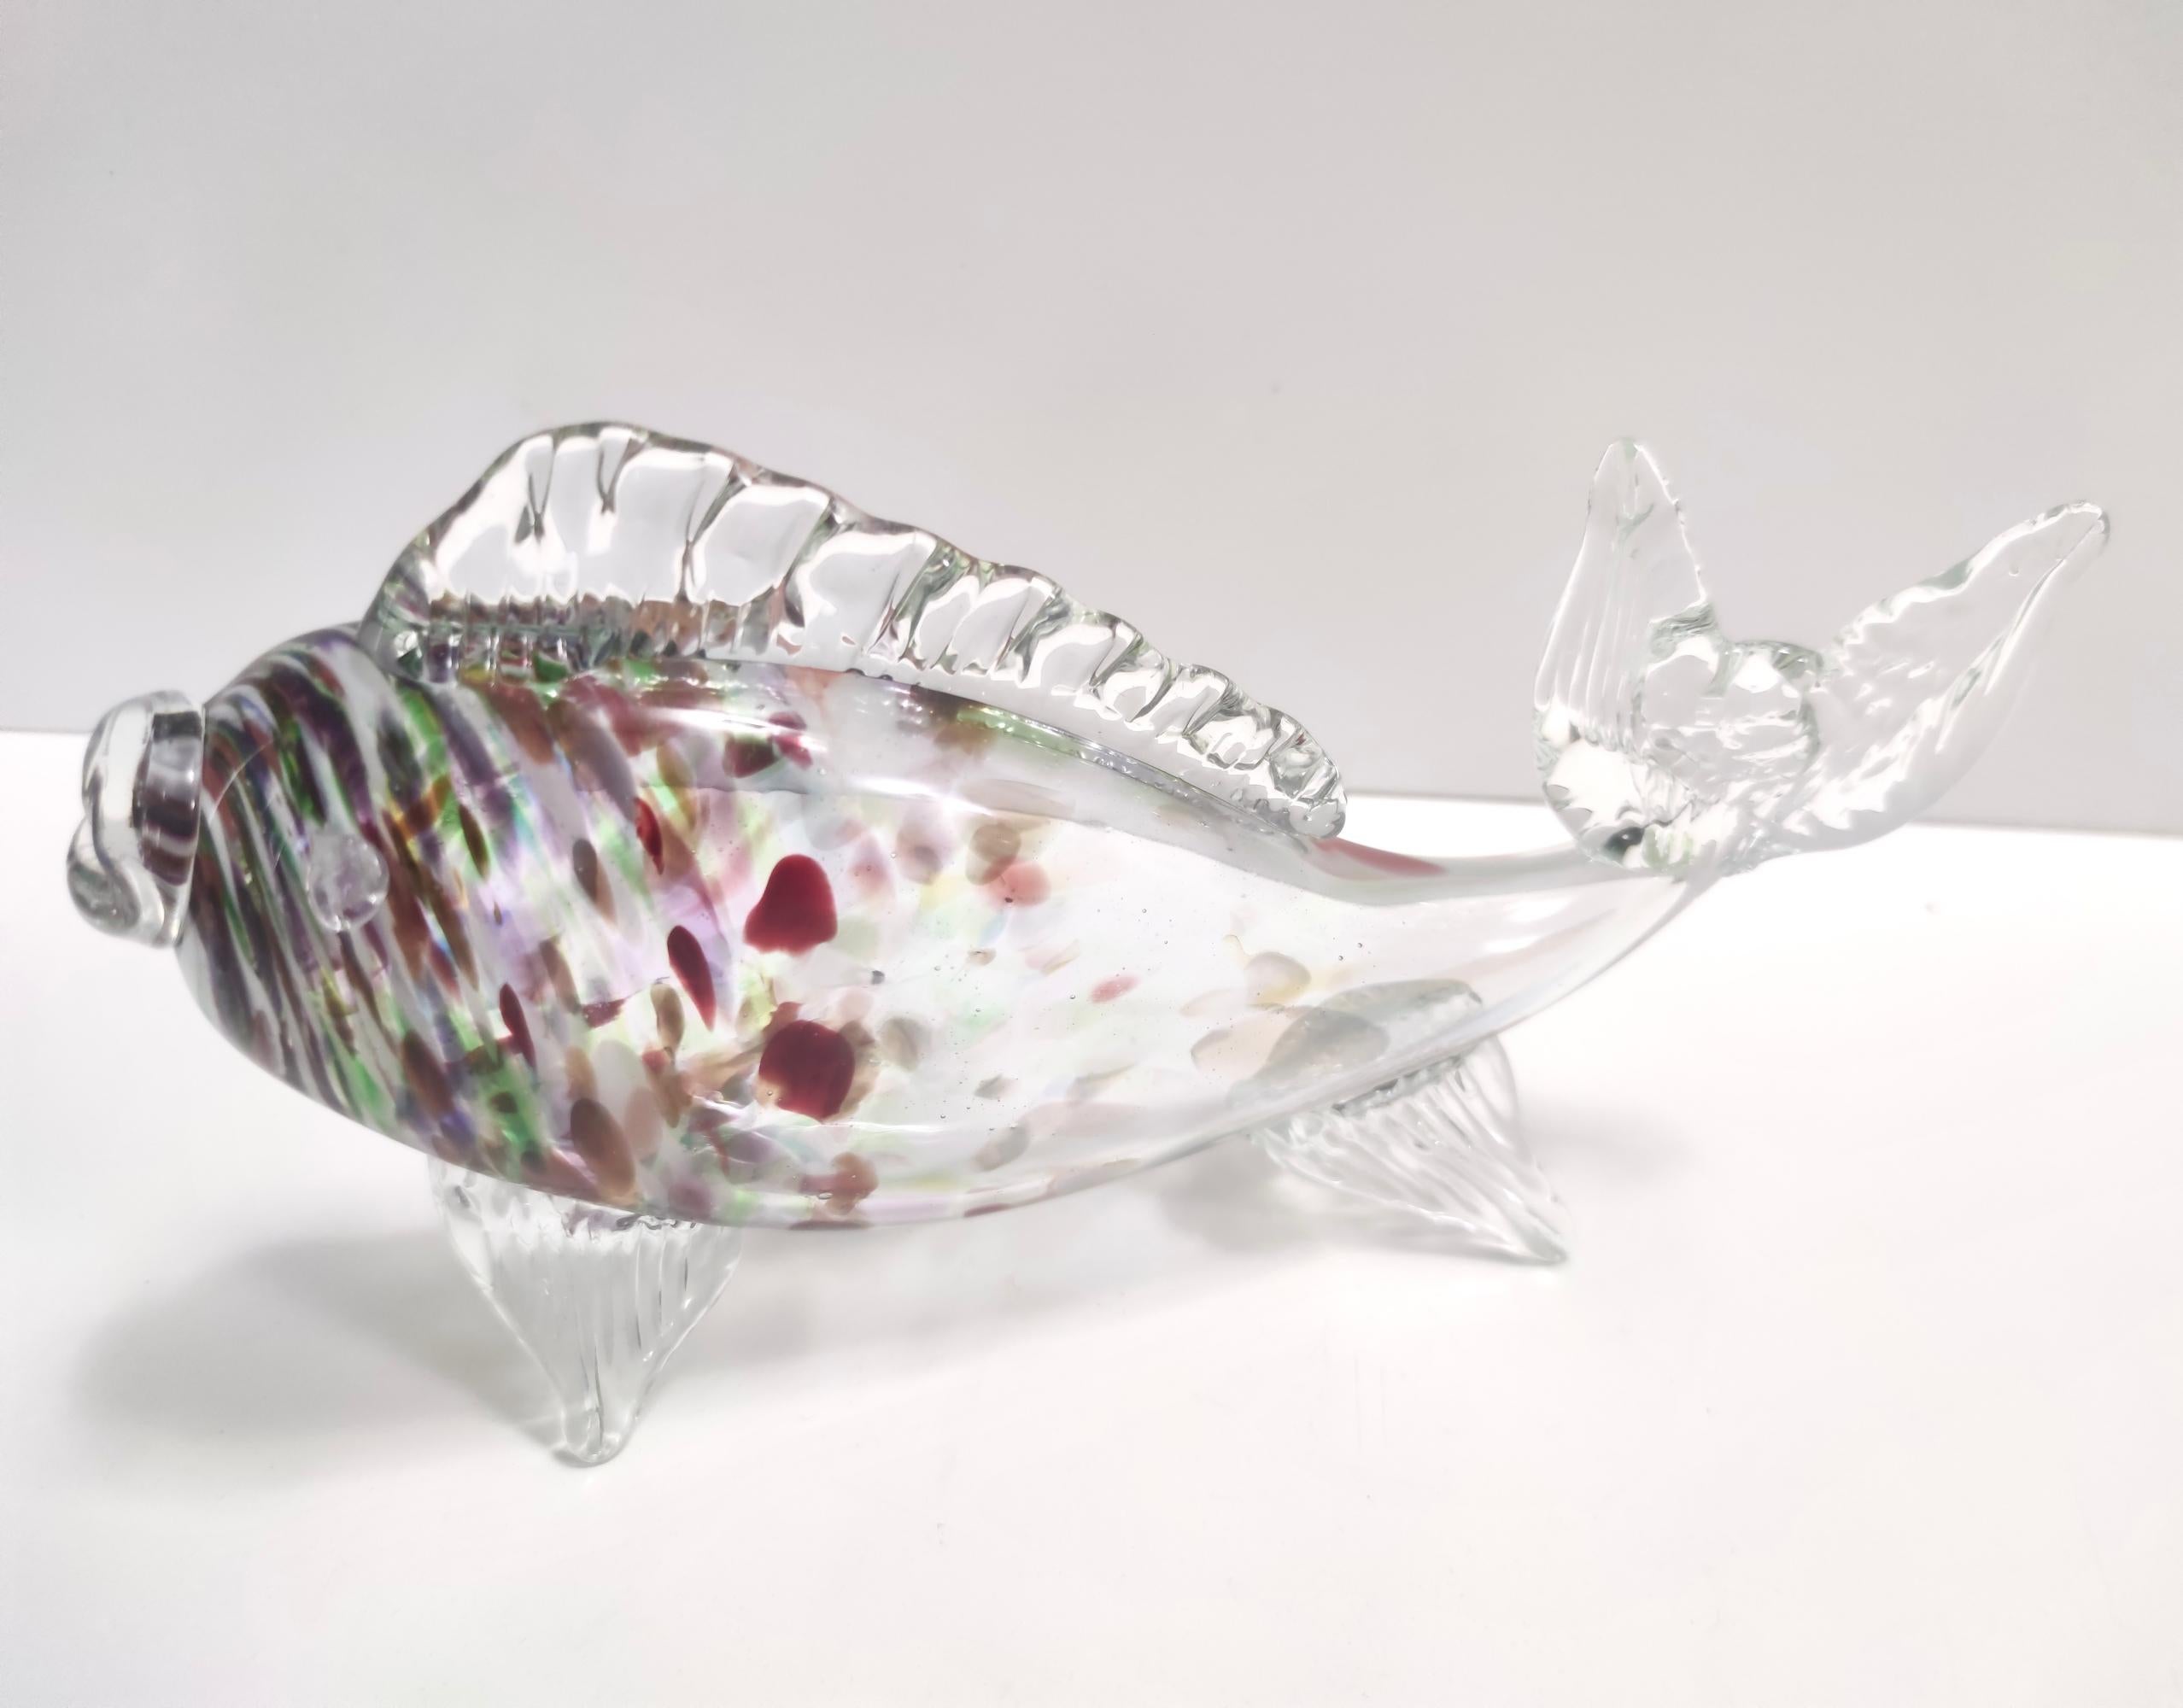 Italian Vintage Murano Glass Fish Decorative Figurine by Fratelli Toso, Italy For Sale